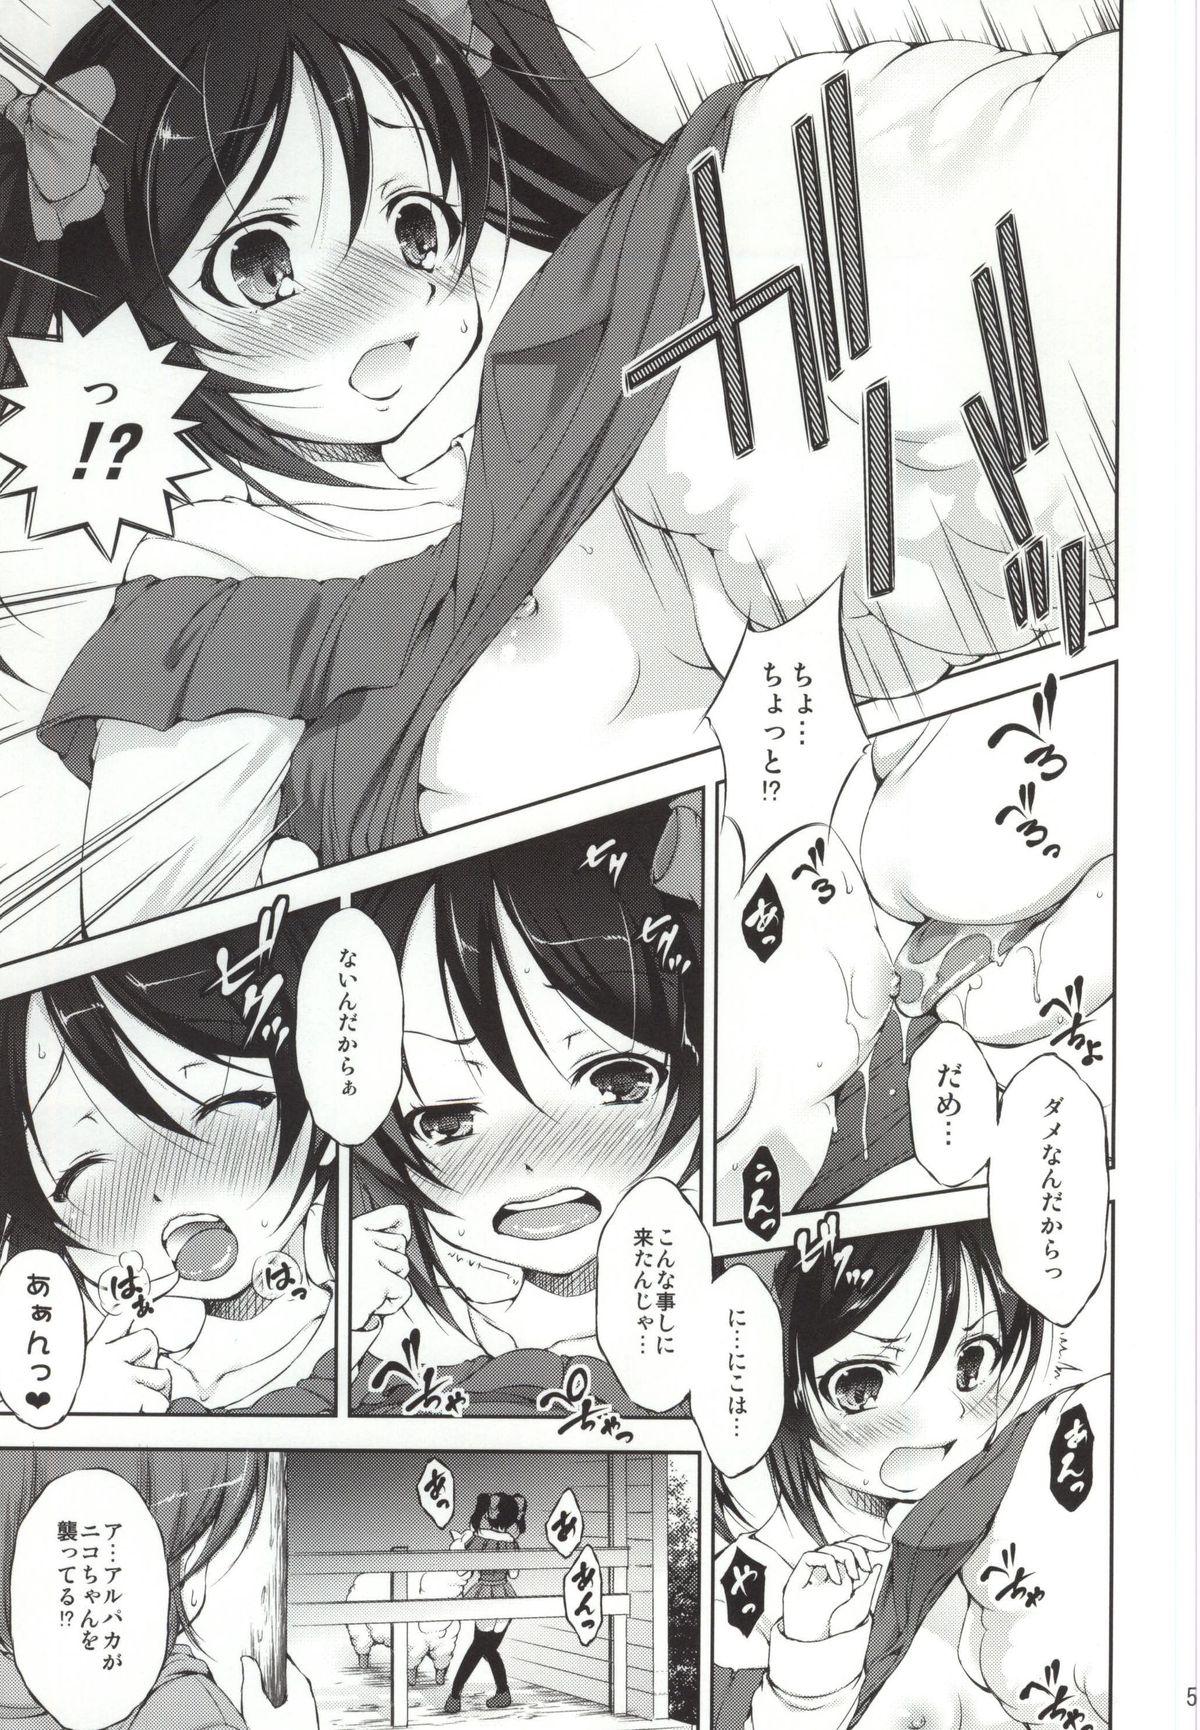 Dykes Alpakan! - Love live Perverted - Page 4